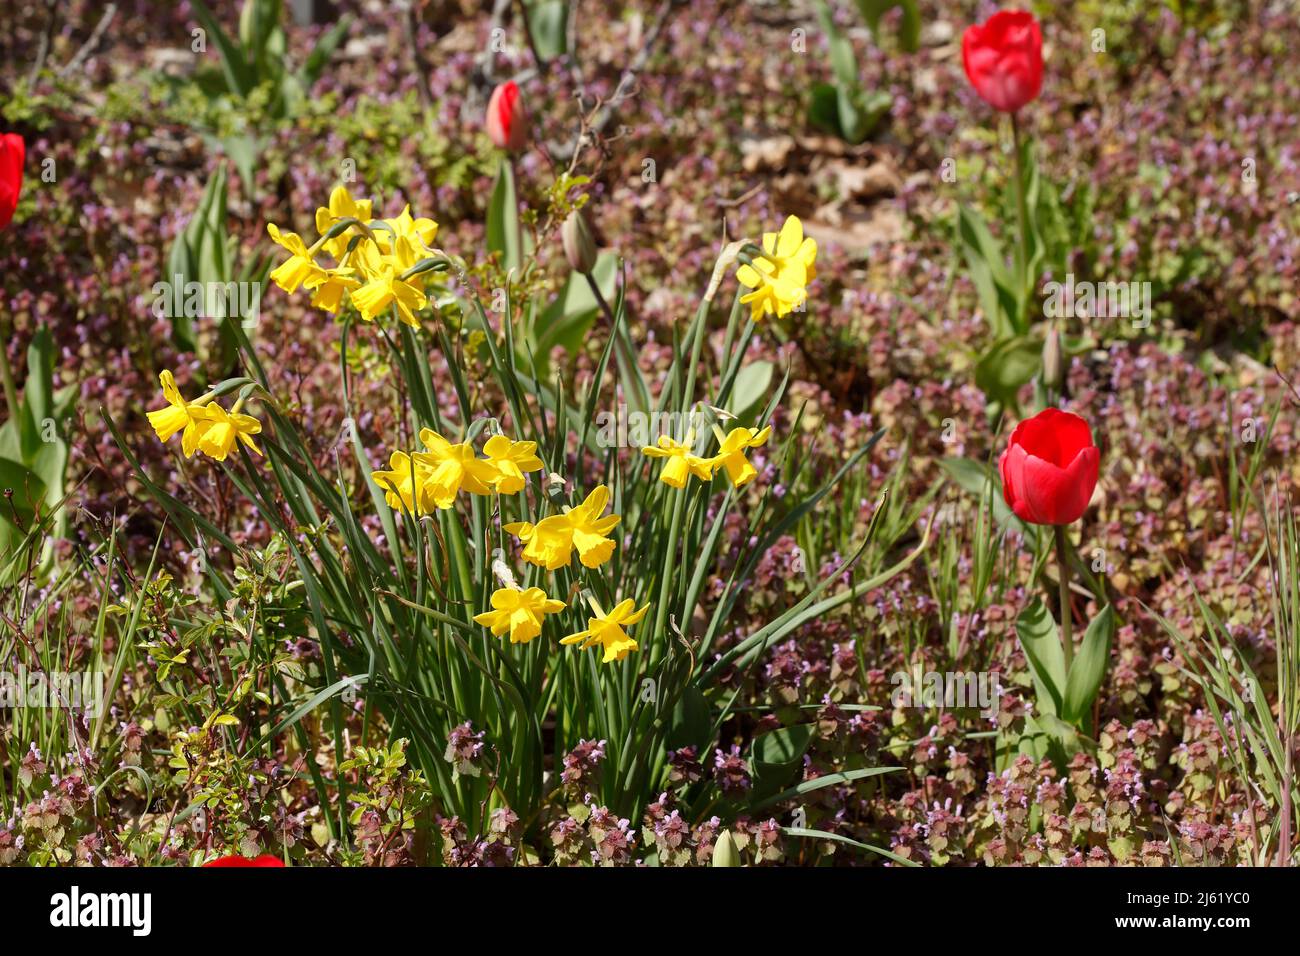 Red and yellow flowering tulips and daffodils, closeup, Germany Stock Photo